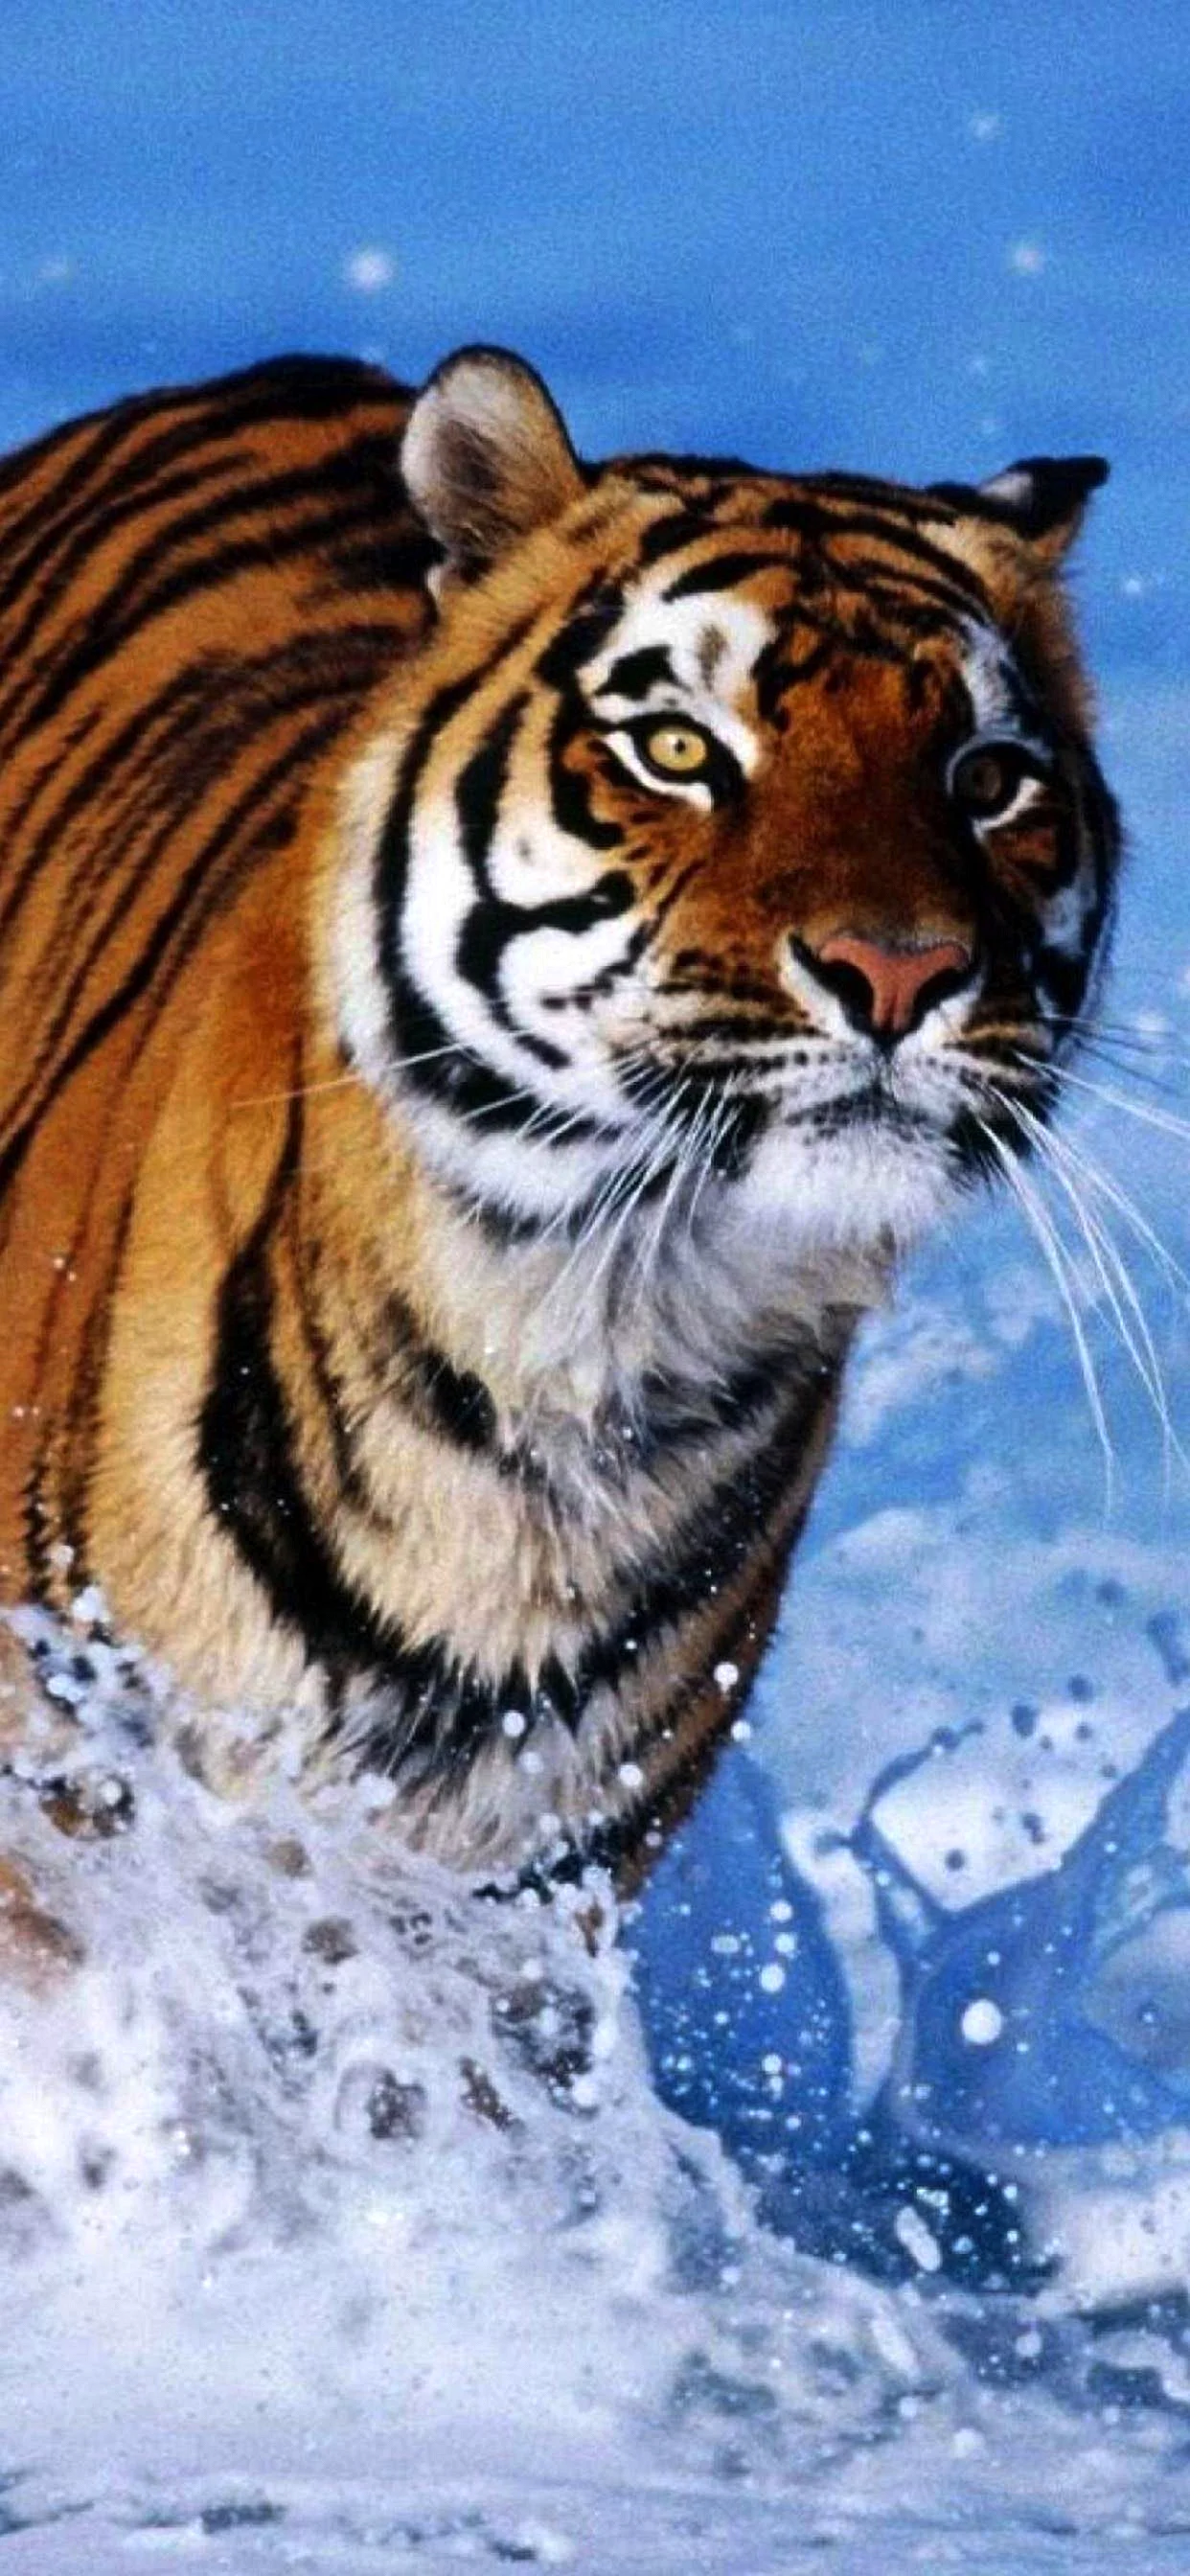 Tiger Wallpaper for iPhone 11 Pro Max